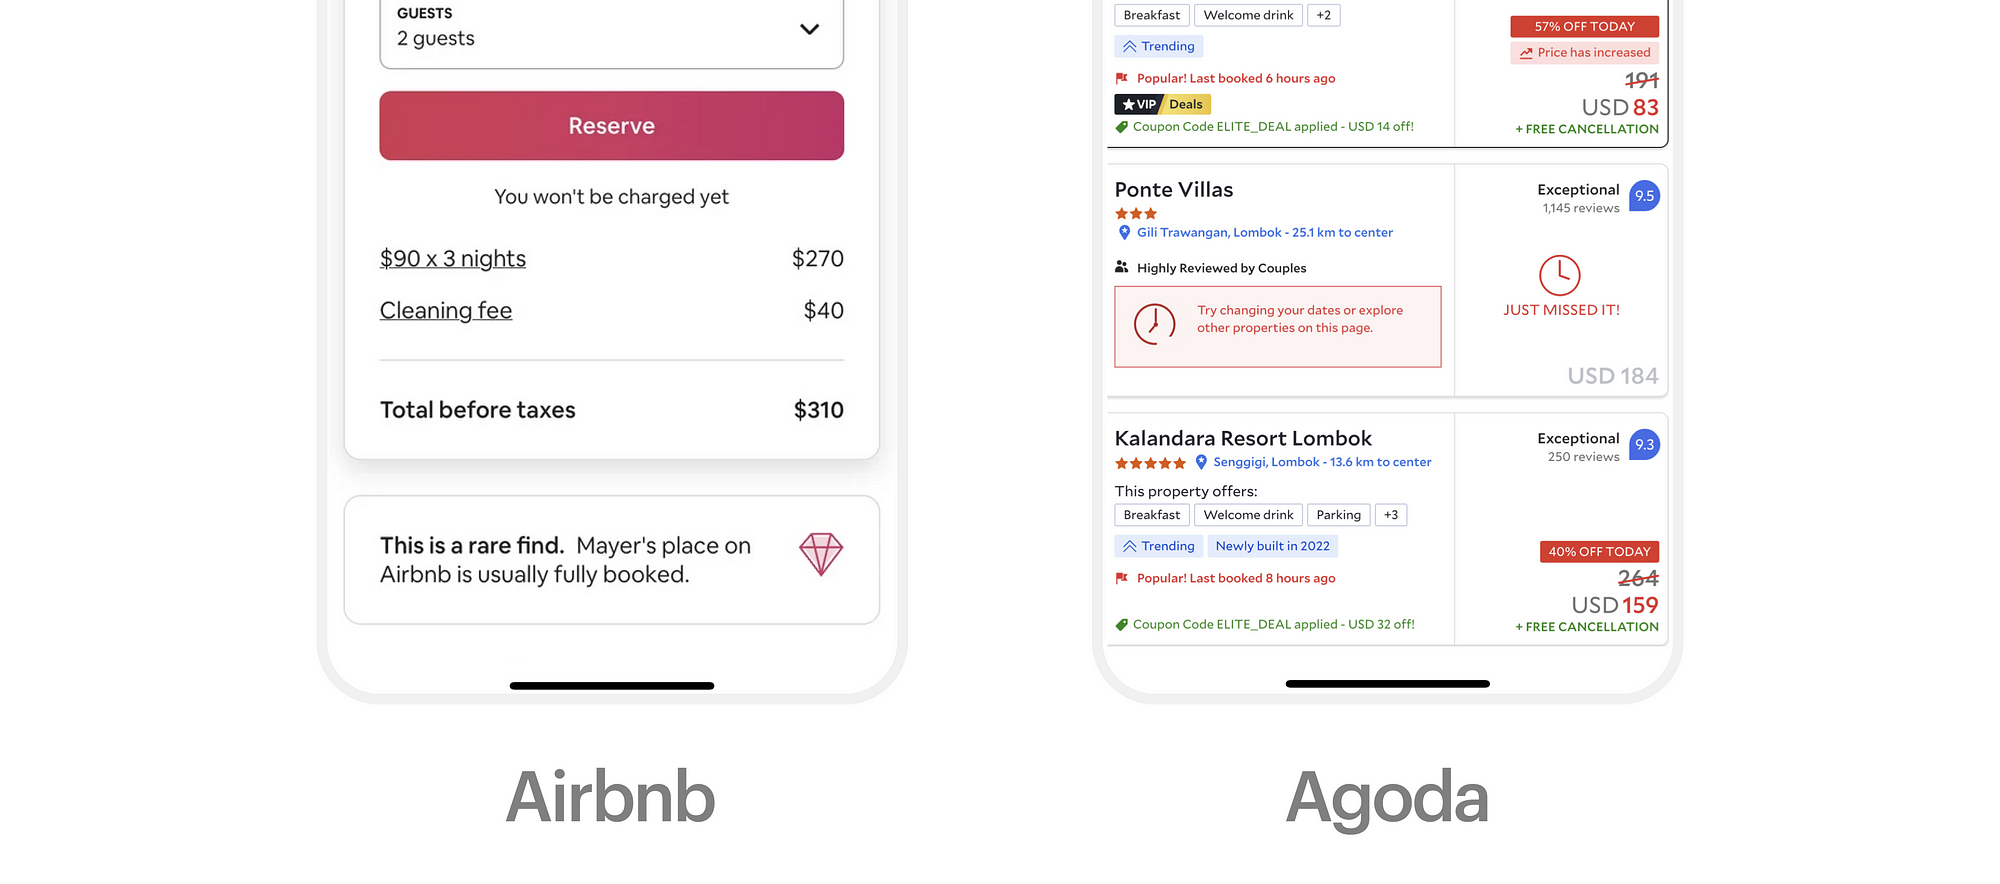 Airbnb vs agoda and showing how they approach scarcity in their app. These are screenshots from the apps.